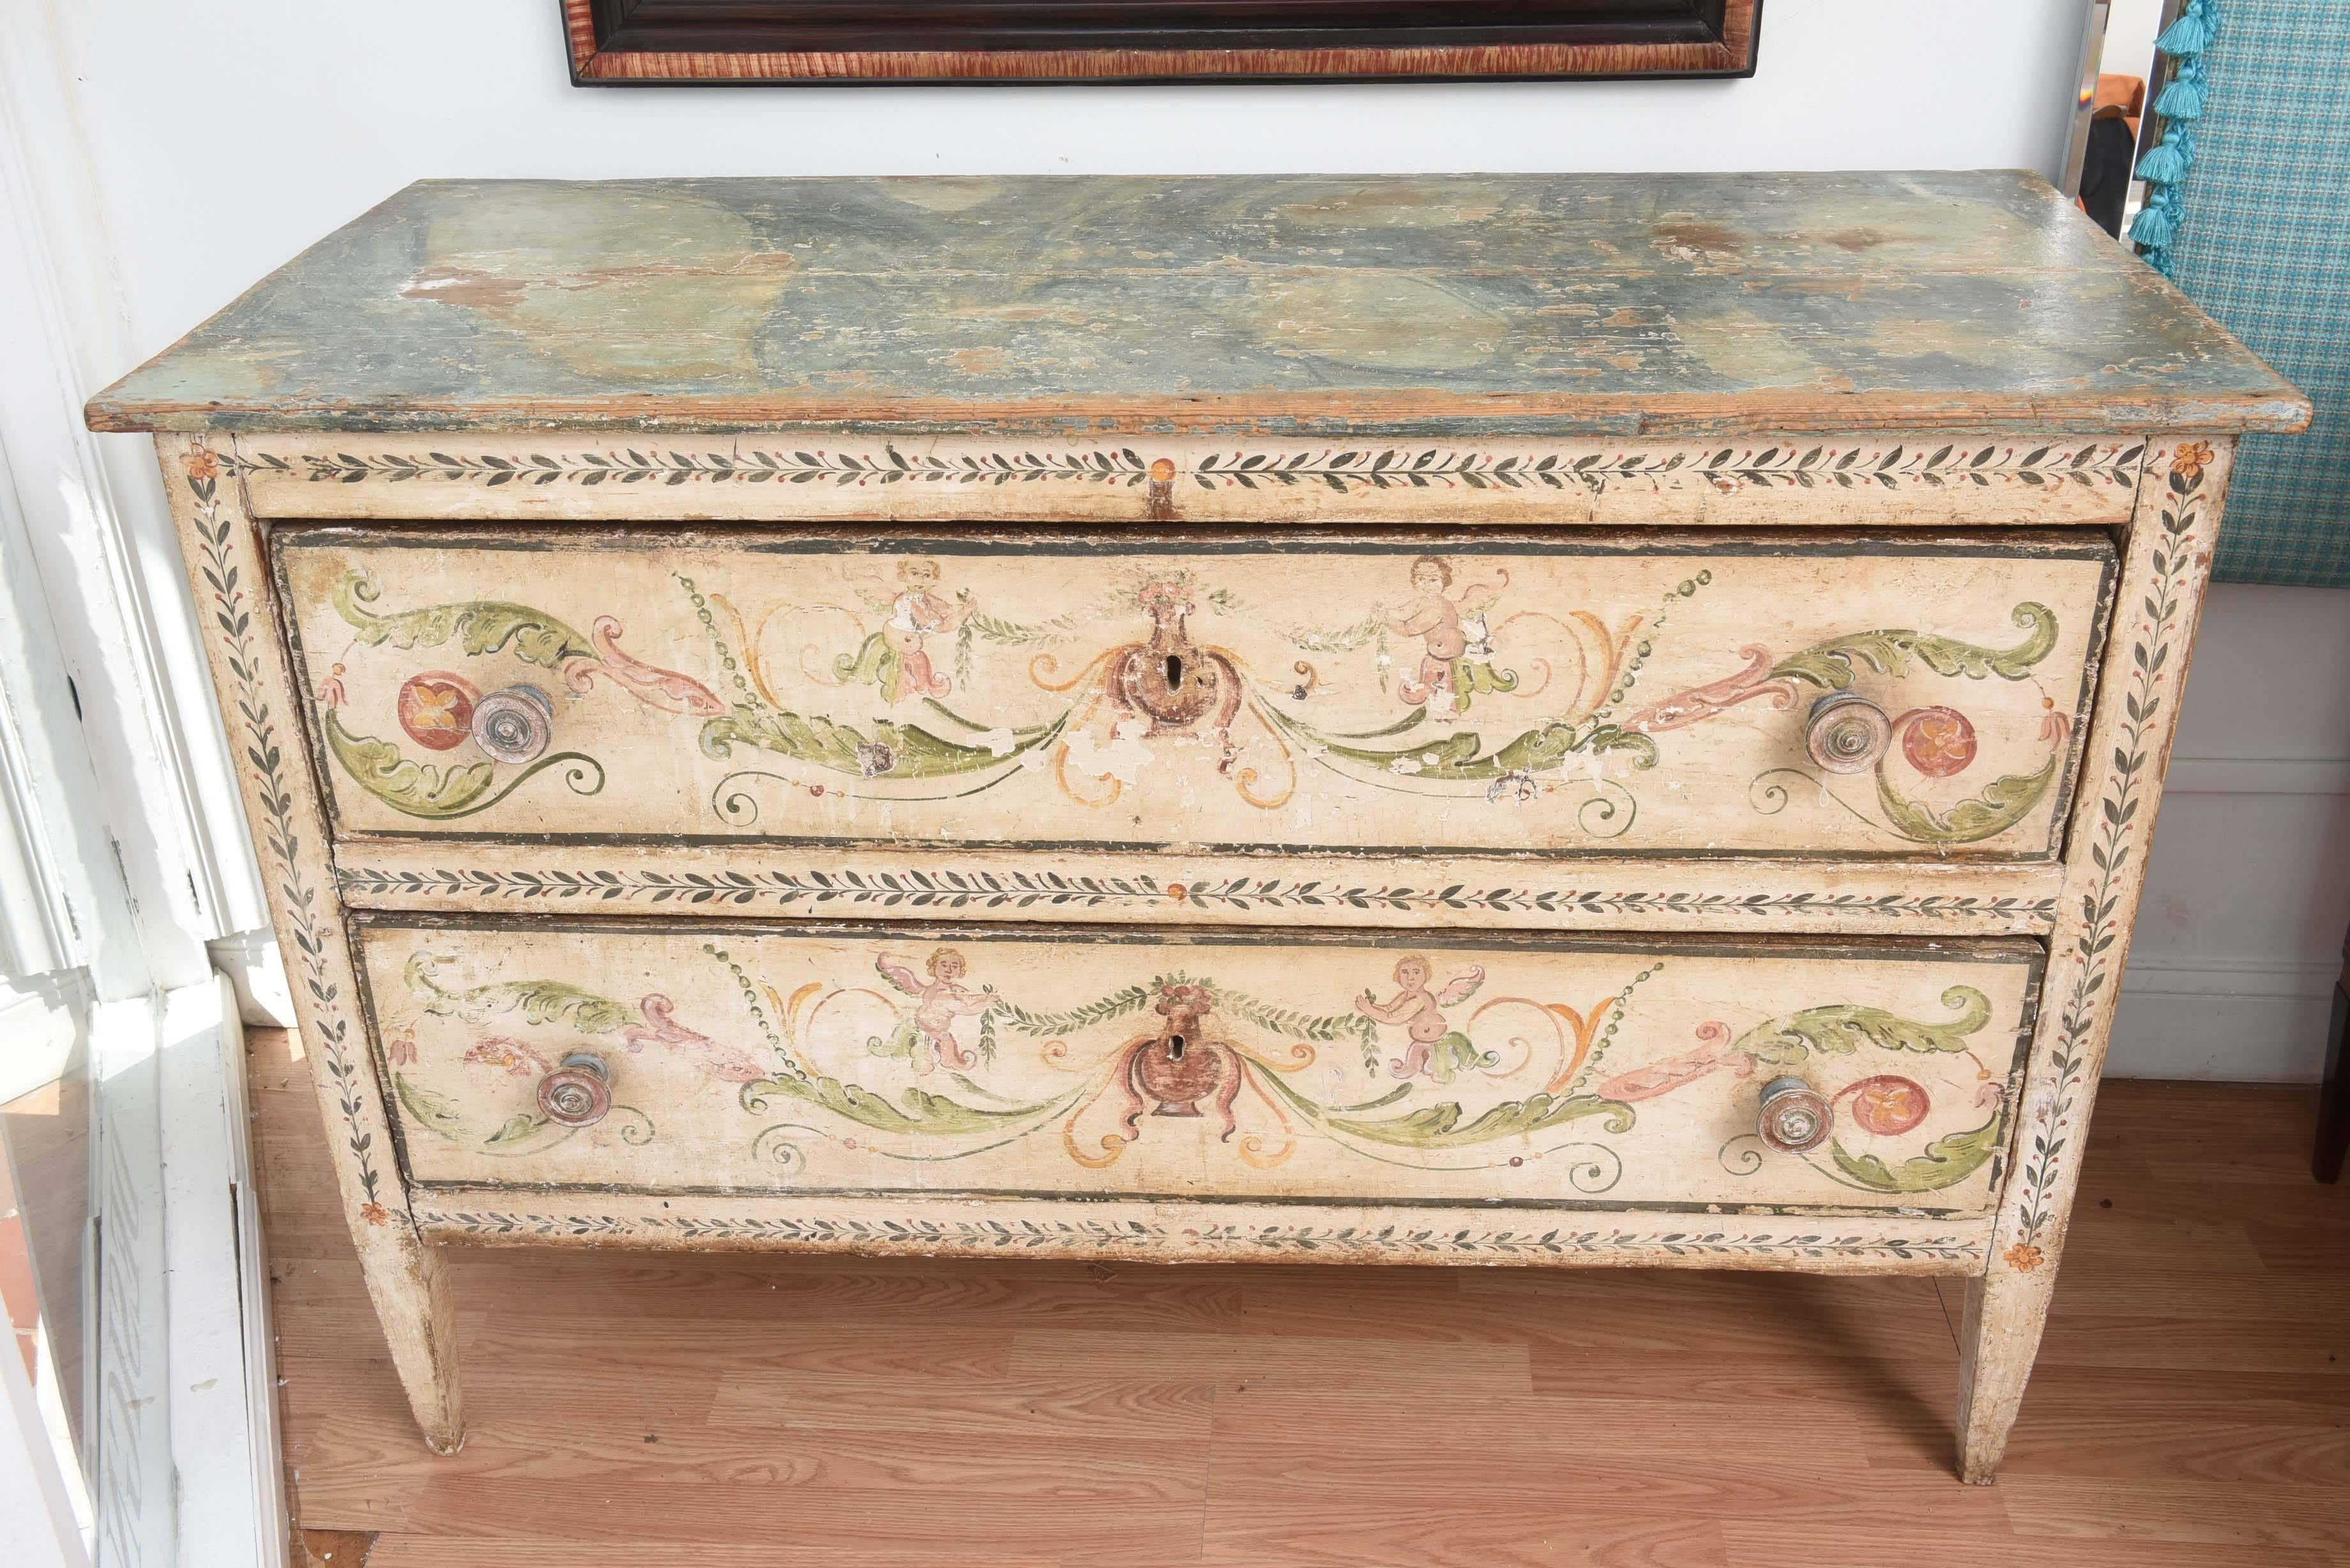 Superb 19th century two-drawer painted commode. All original, no restoration.